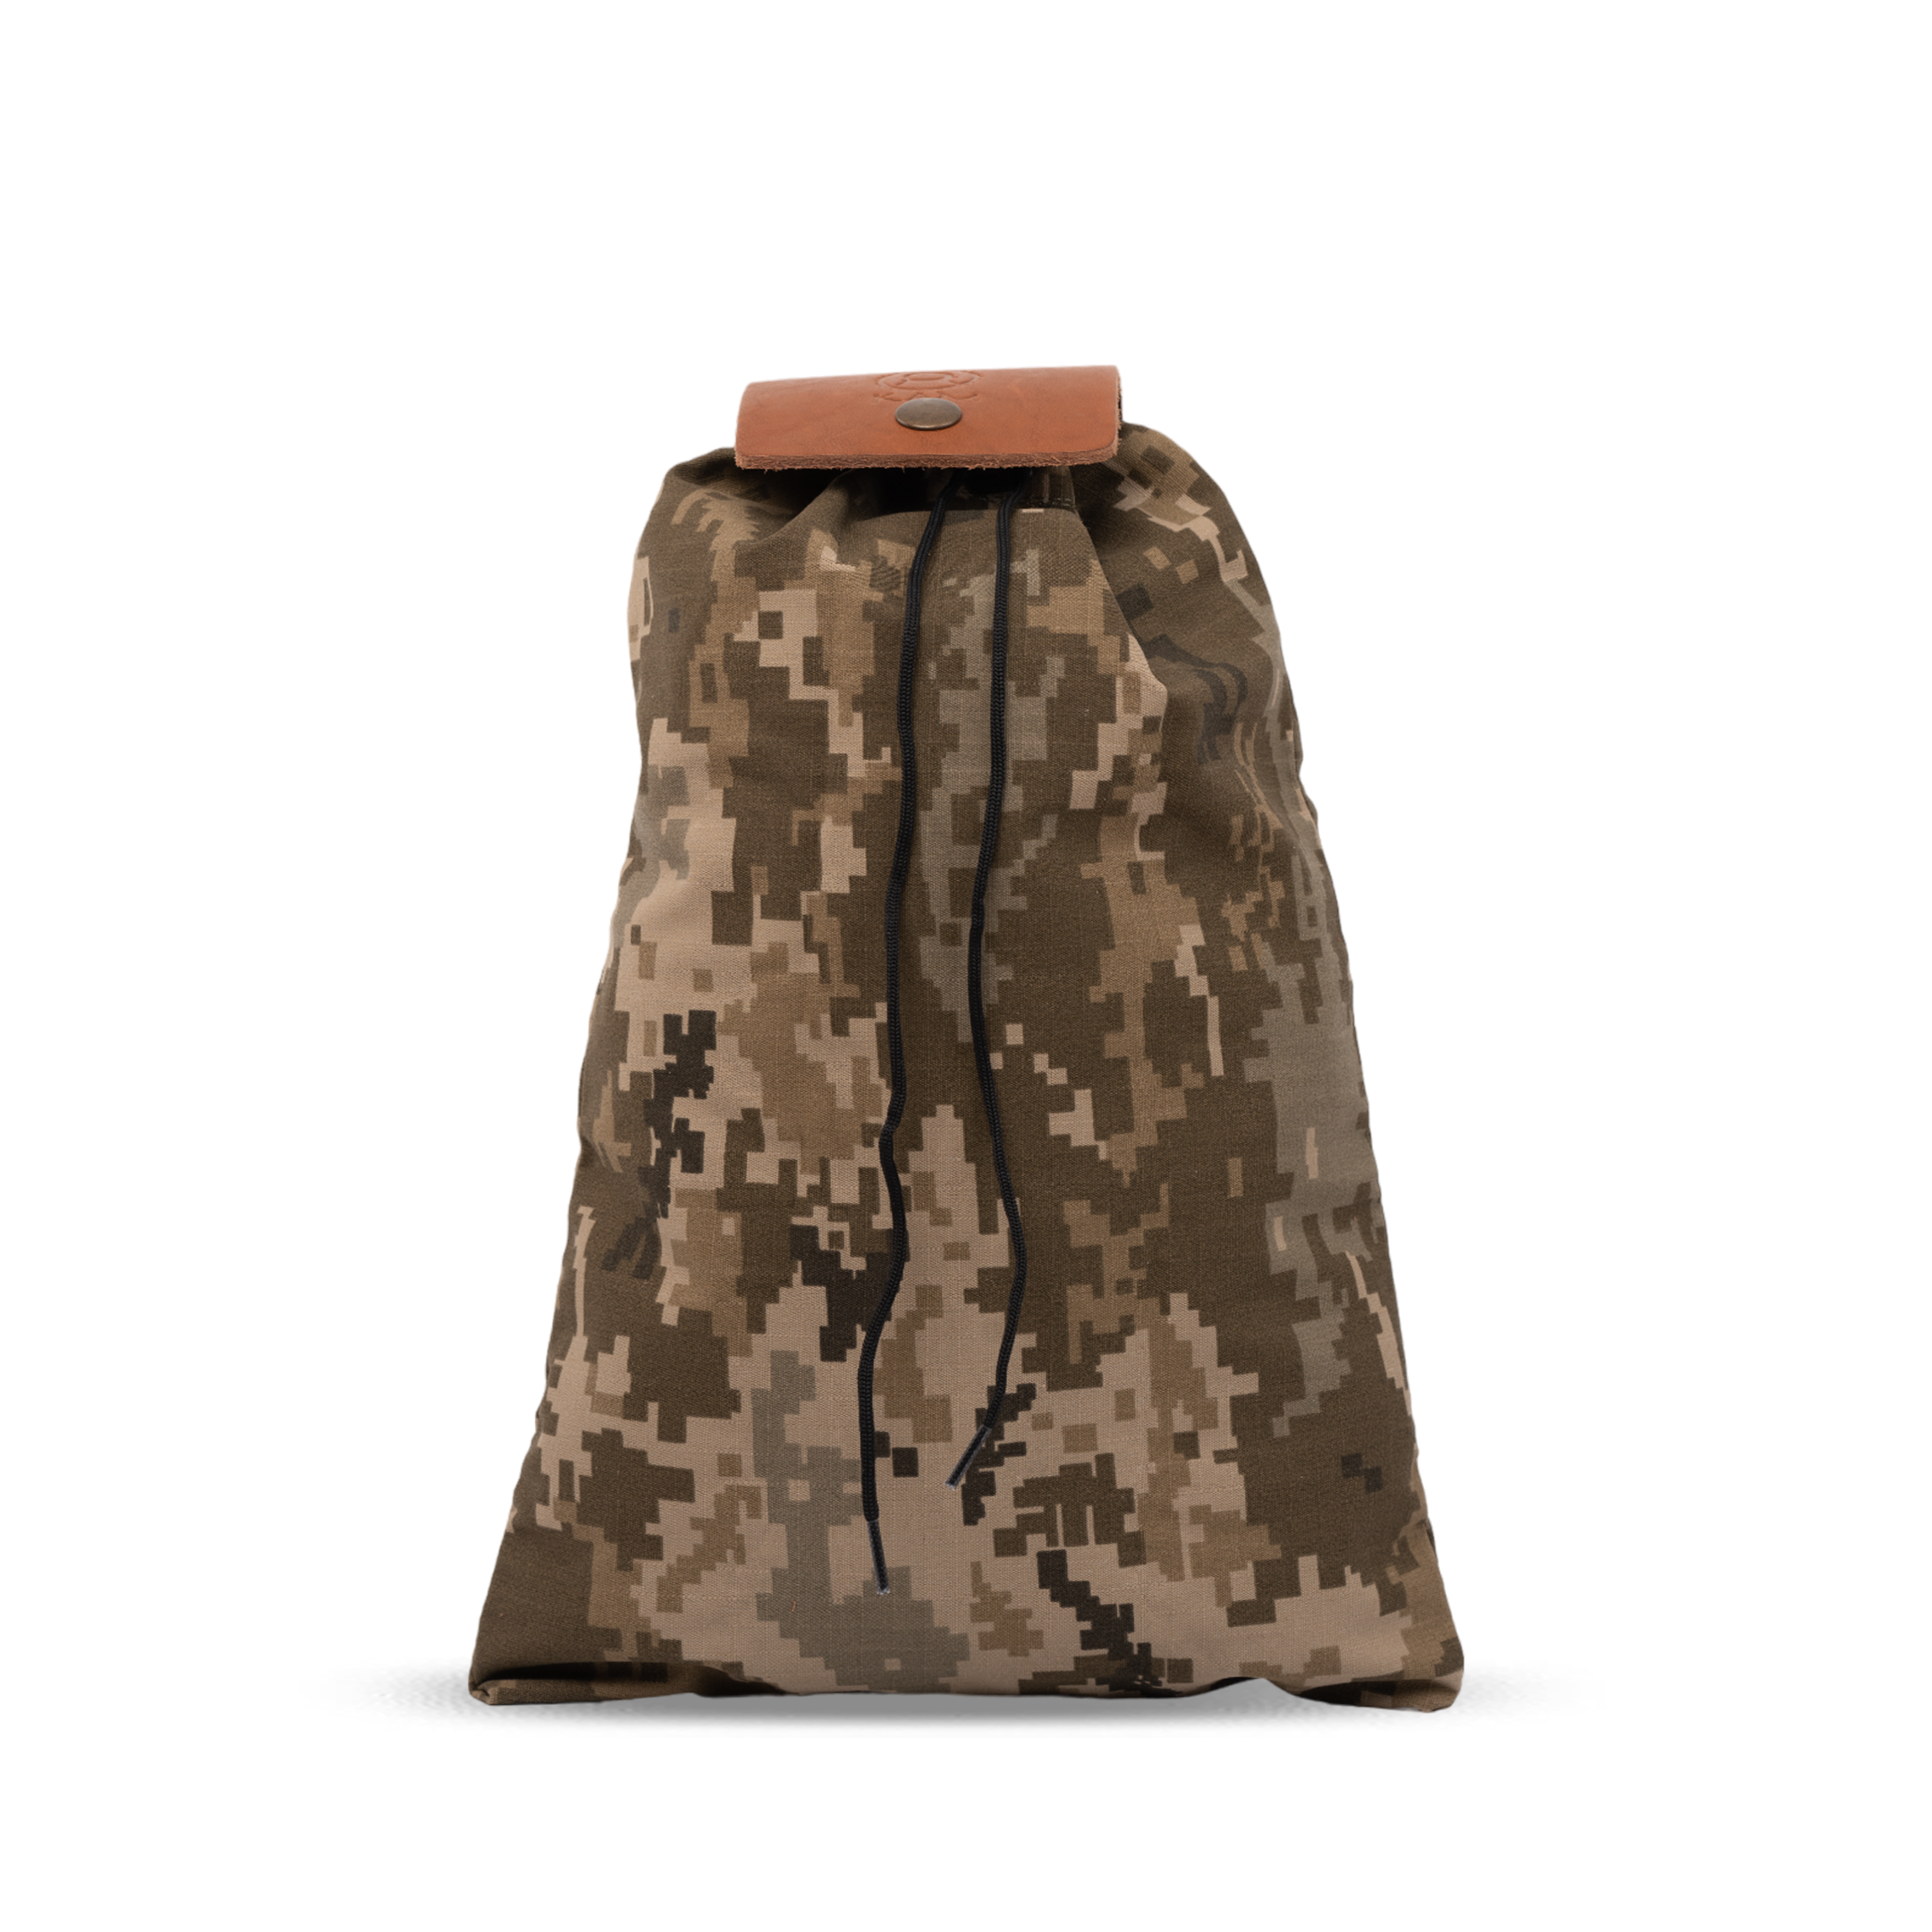 Kam Knife - OK - Light Brown Forest Pouch